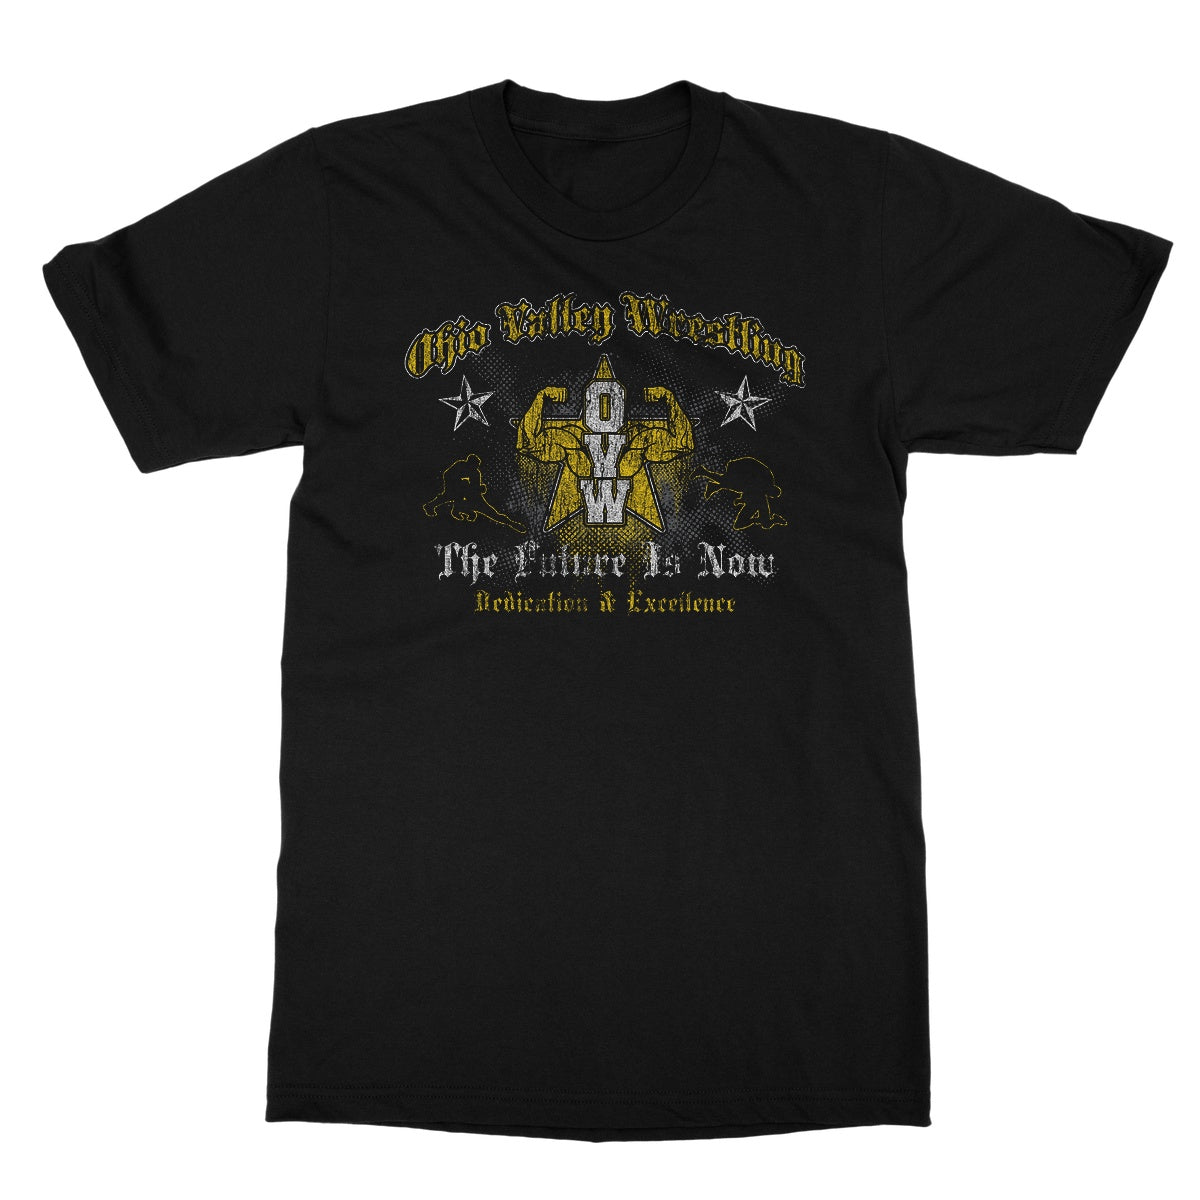 OVW Wrestling The Future Is NOW! Softstyle T-Shirt